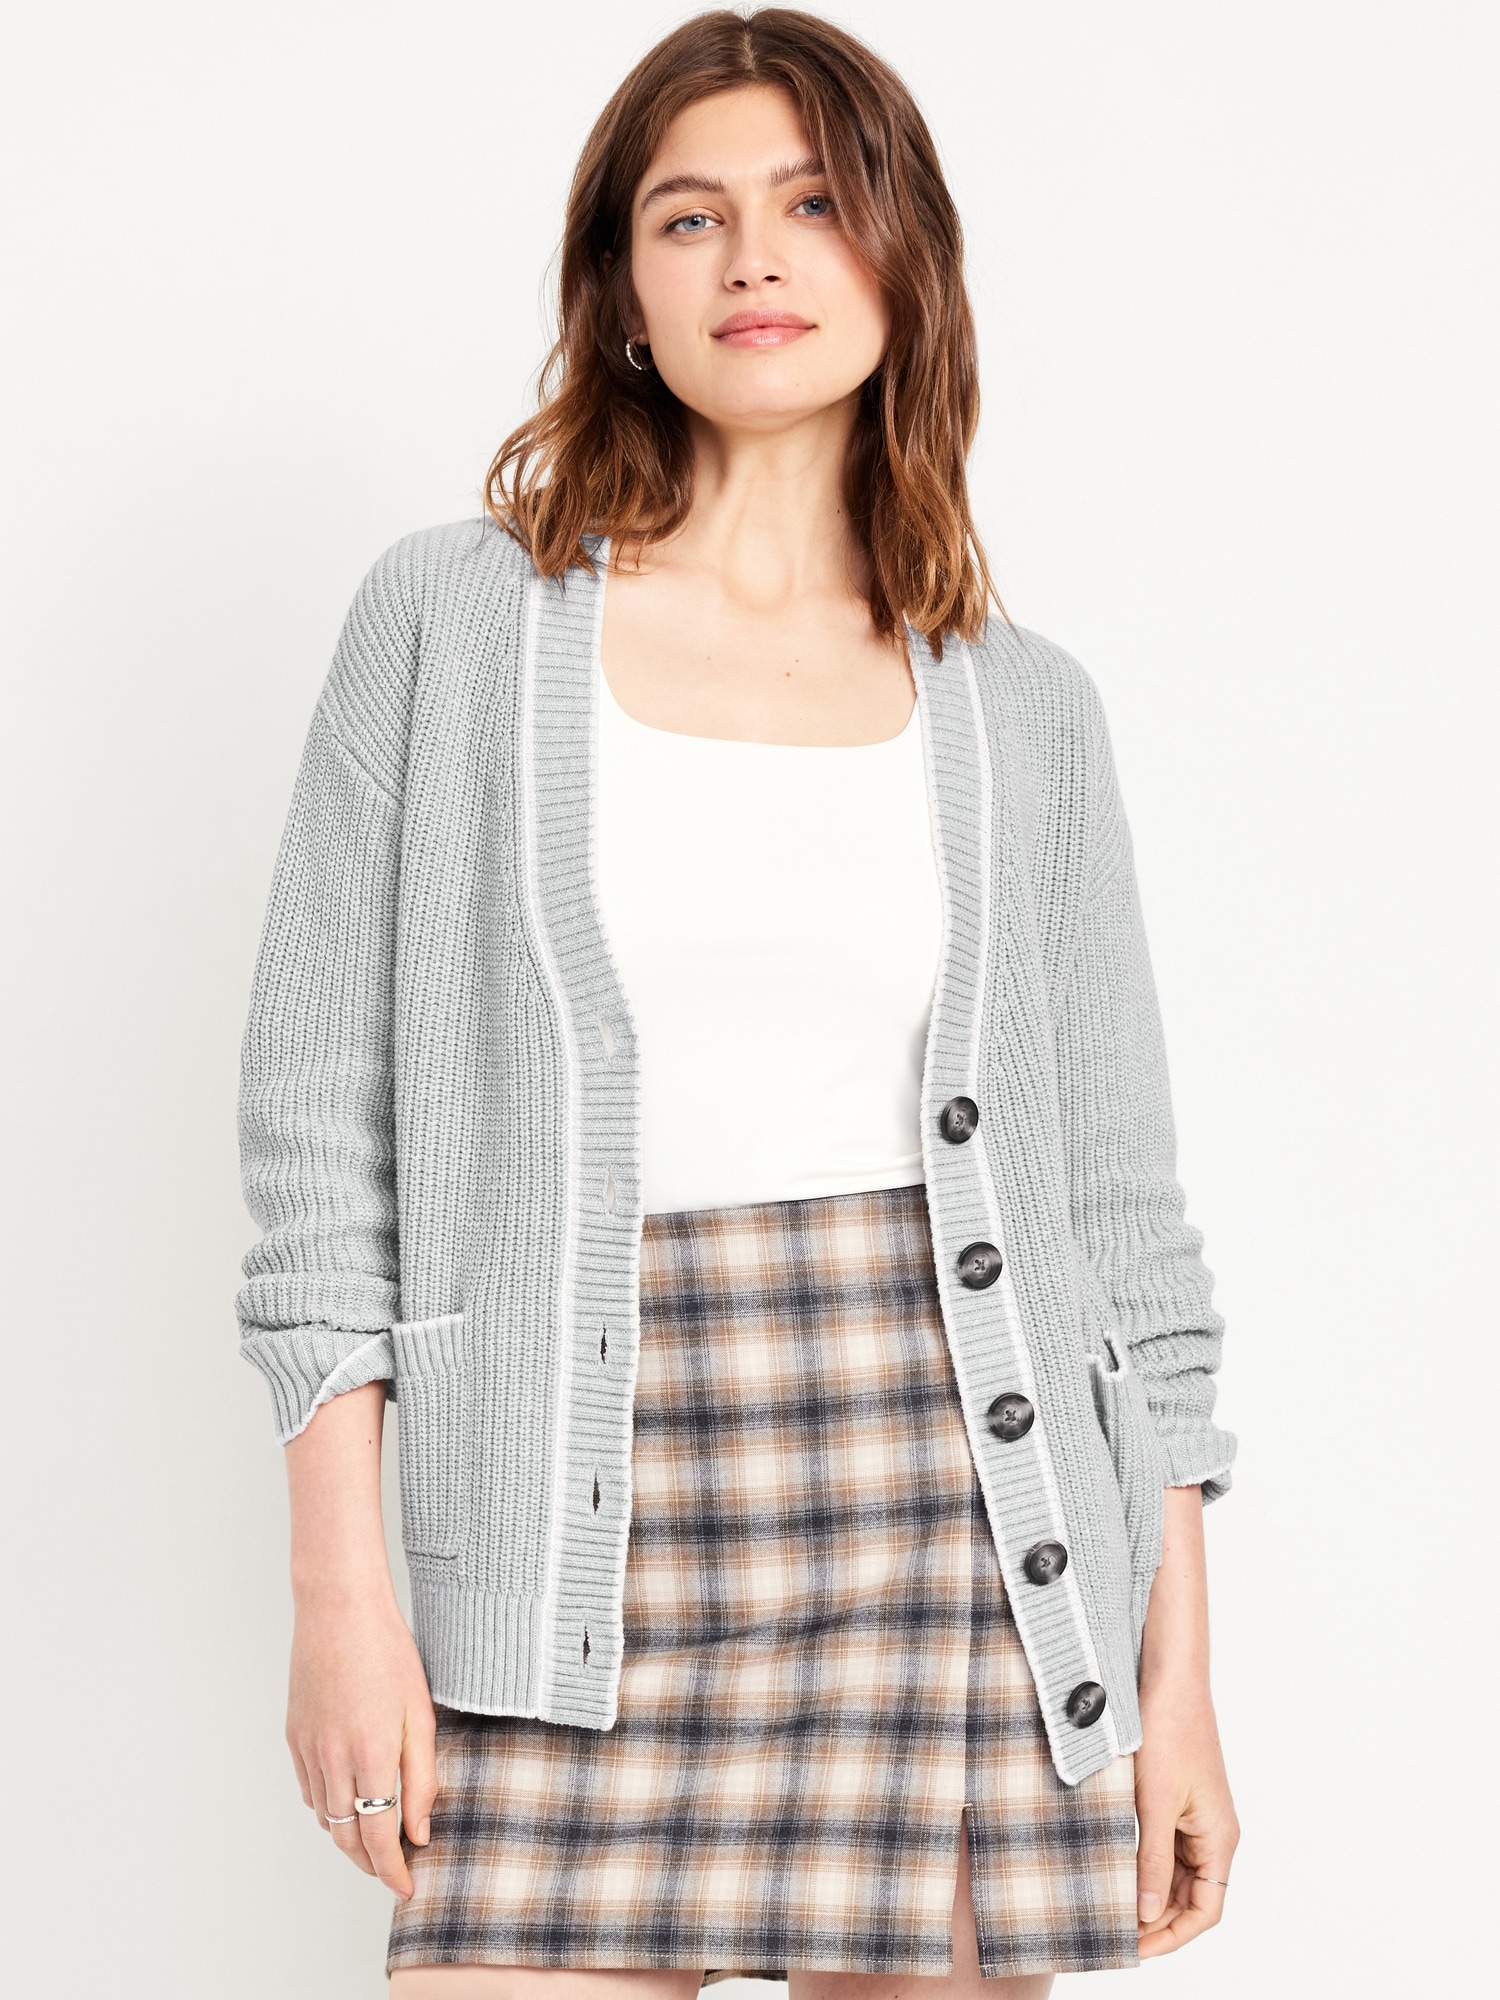 Relaxed Cardigan Sweater